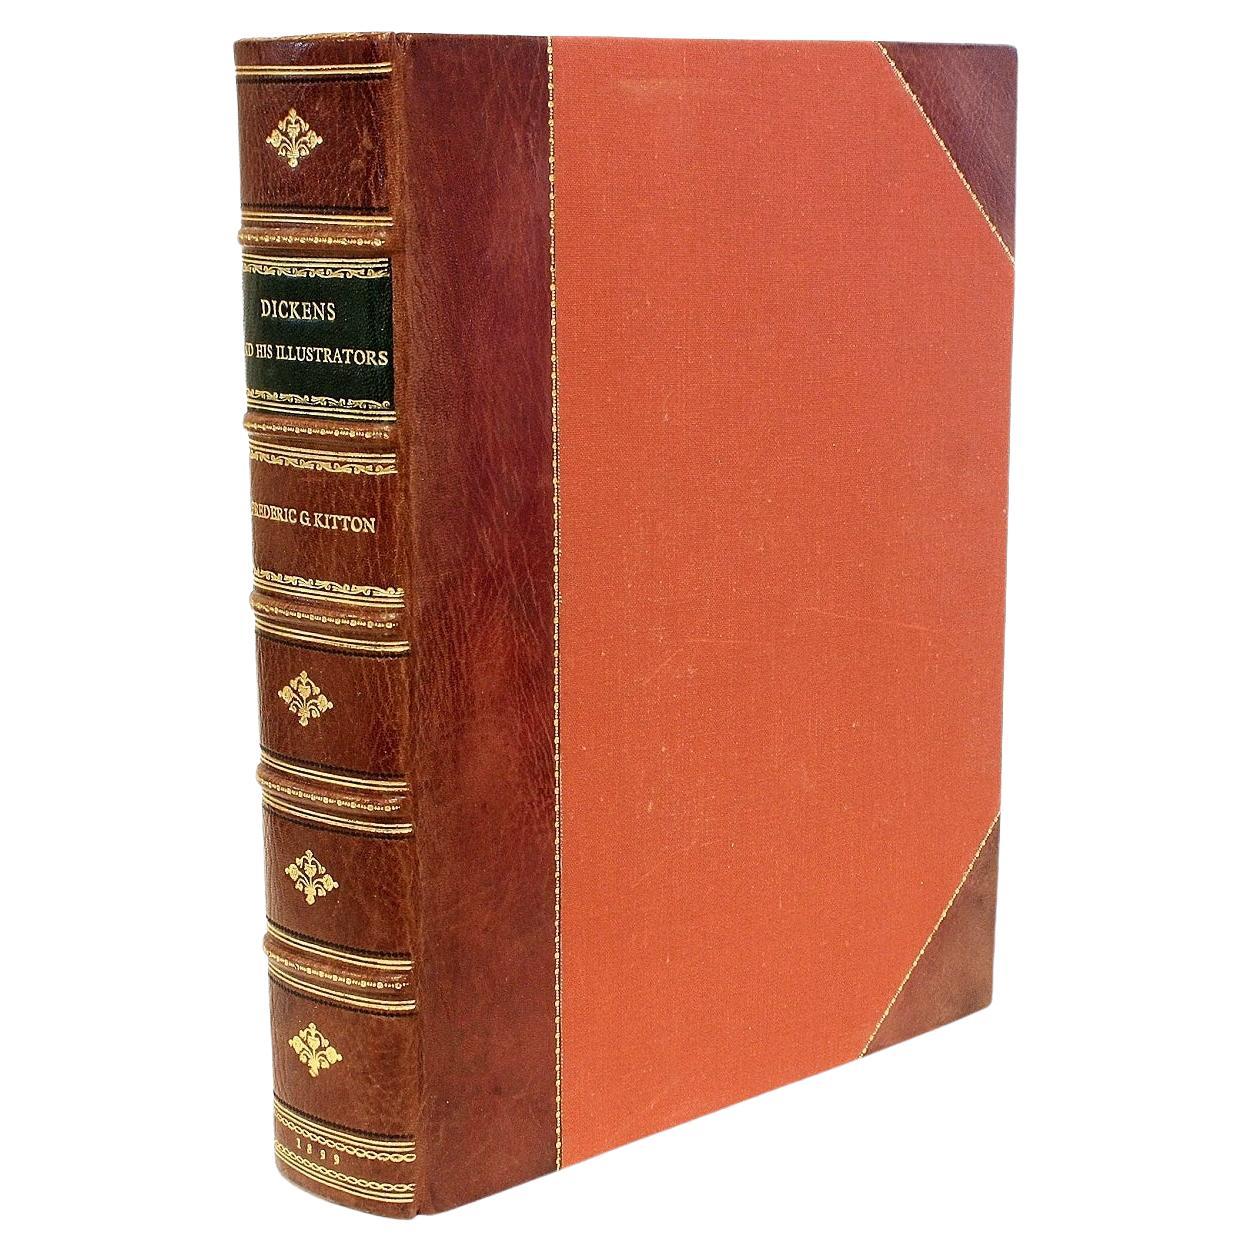 Kitton, Frederic G.-Dickens and His Illustrators-in a Fine Leather Binding For Sale